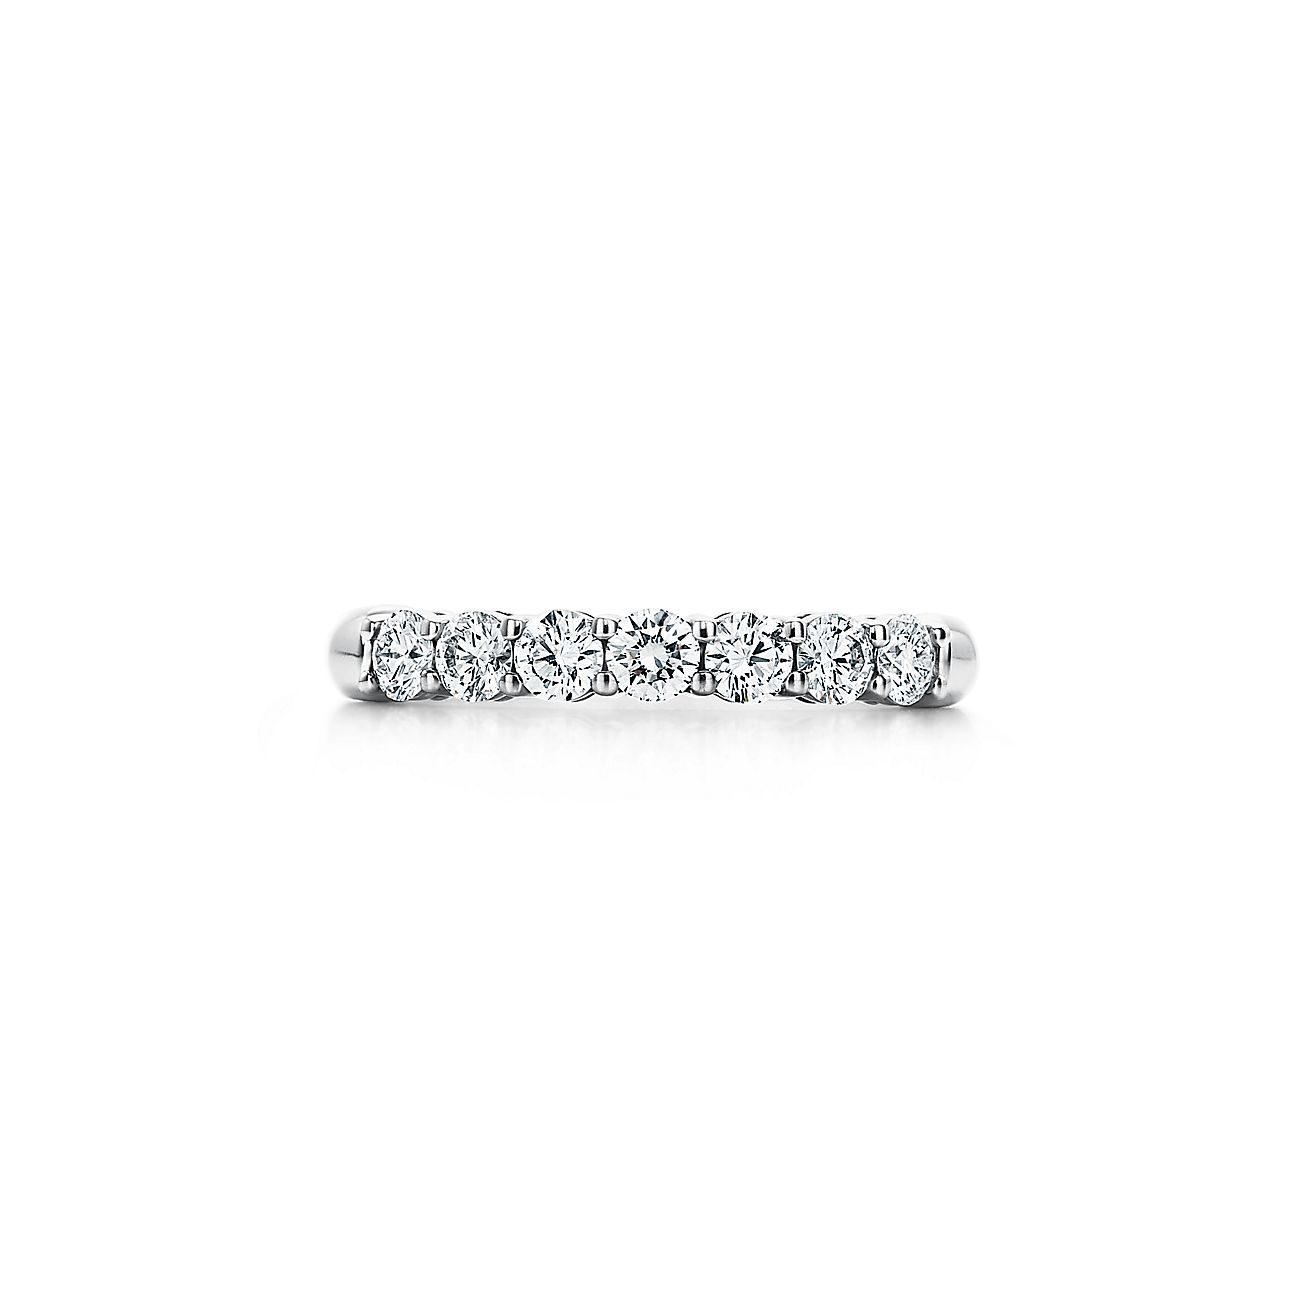 Tiffany Forever Band Ring in with a Half-circle of 3 mm Wide Tiffany & Co.